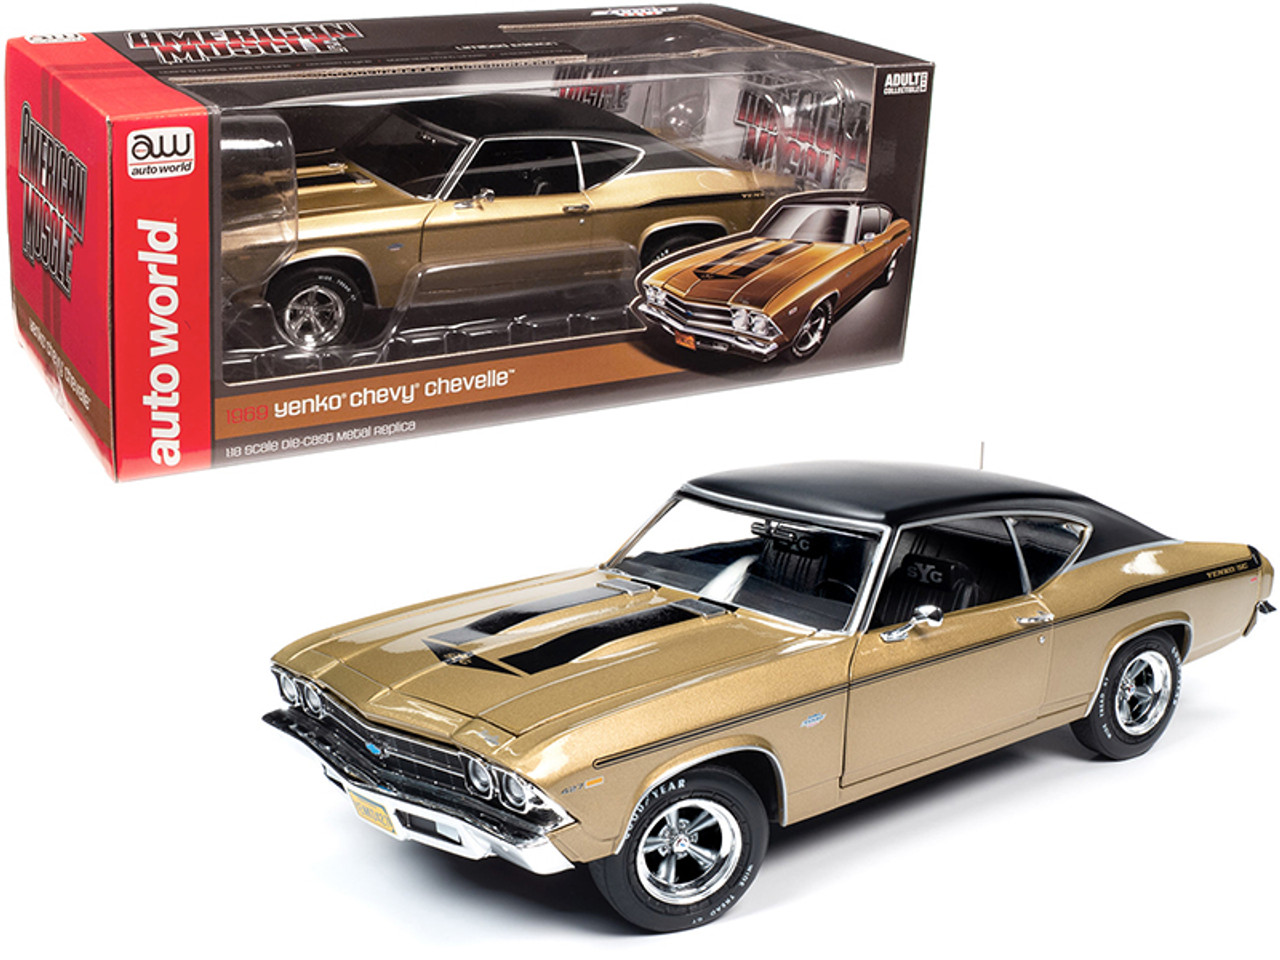 1969 Chevrolet Chevelle Yenko Hardtop Olympic Gold Metallic with Black Top and Black Stripes 1/18 Diecast Model Car by Autoworld